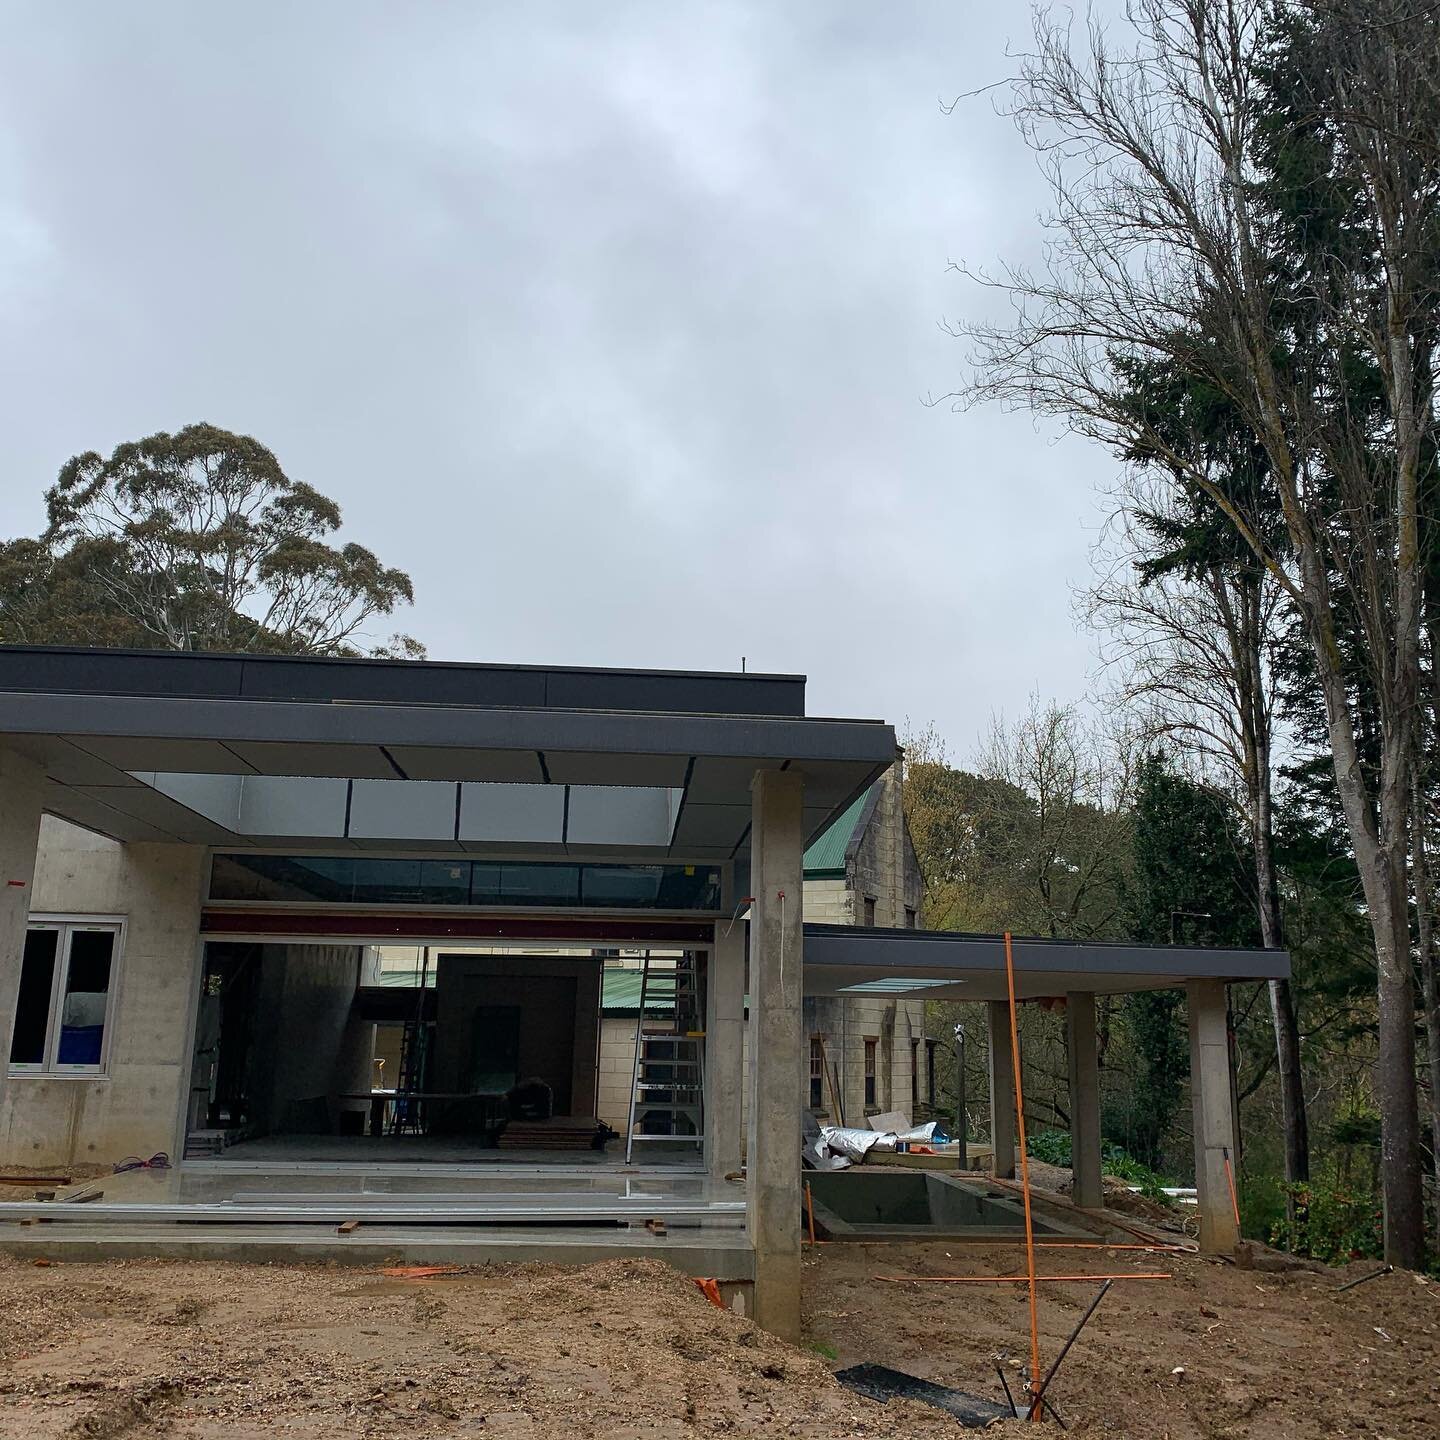 Carey Gully project starting to take shape. Looking forward to seeing the combination of off form concrete walls with floor to ceiling glazing. #adelaidedesign #aluminiumwindows #adelaidearchitecture #moderhouse